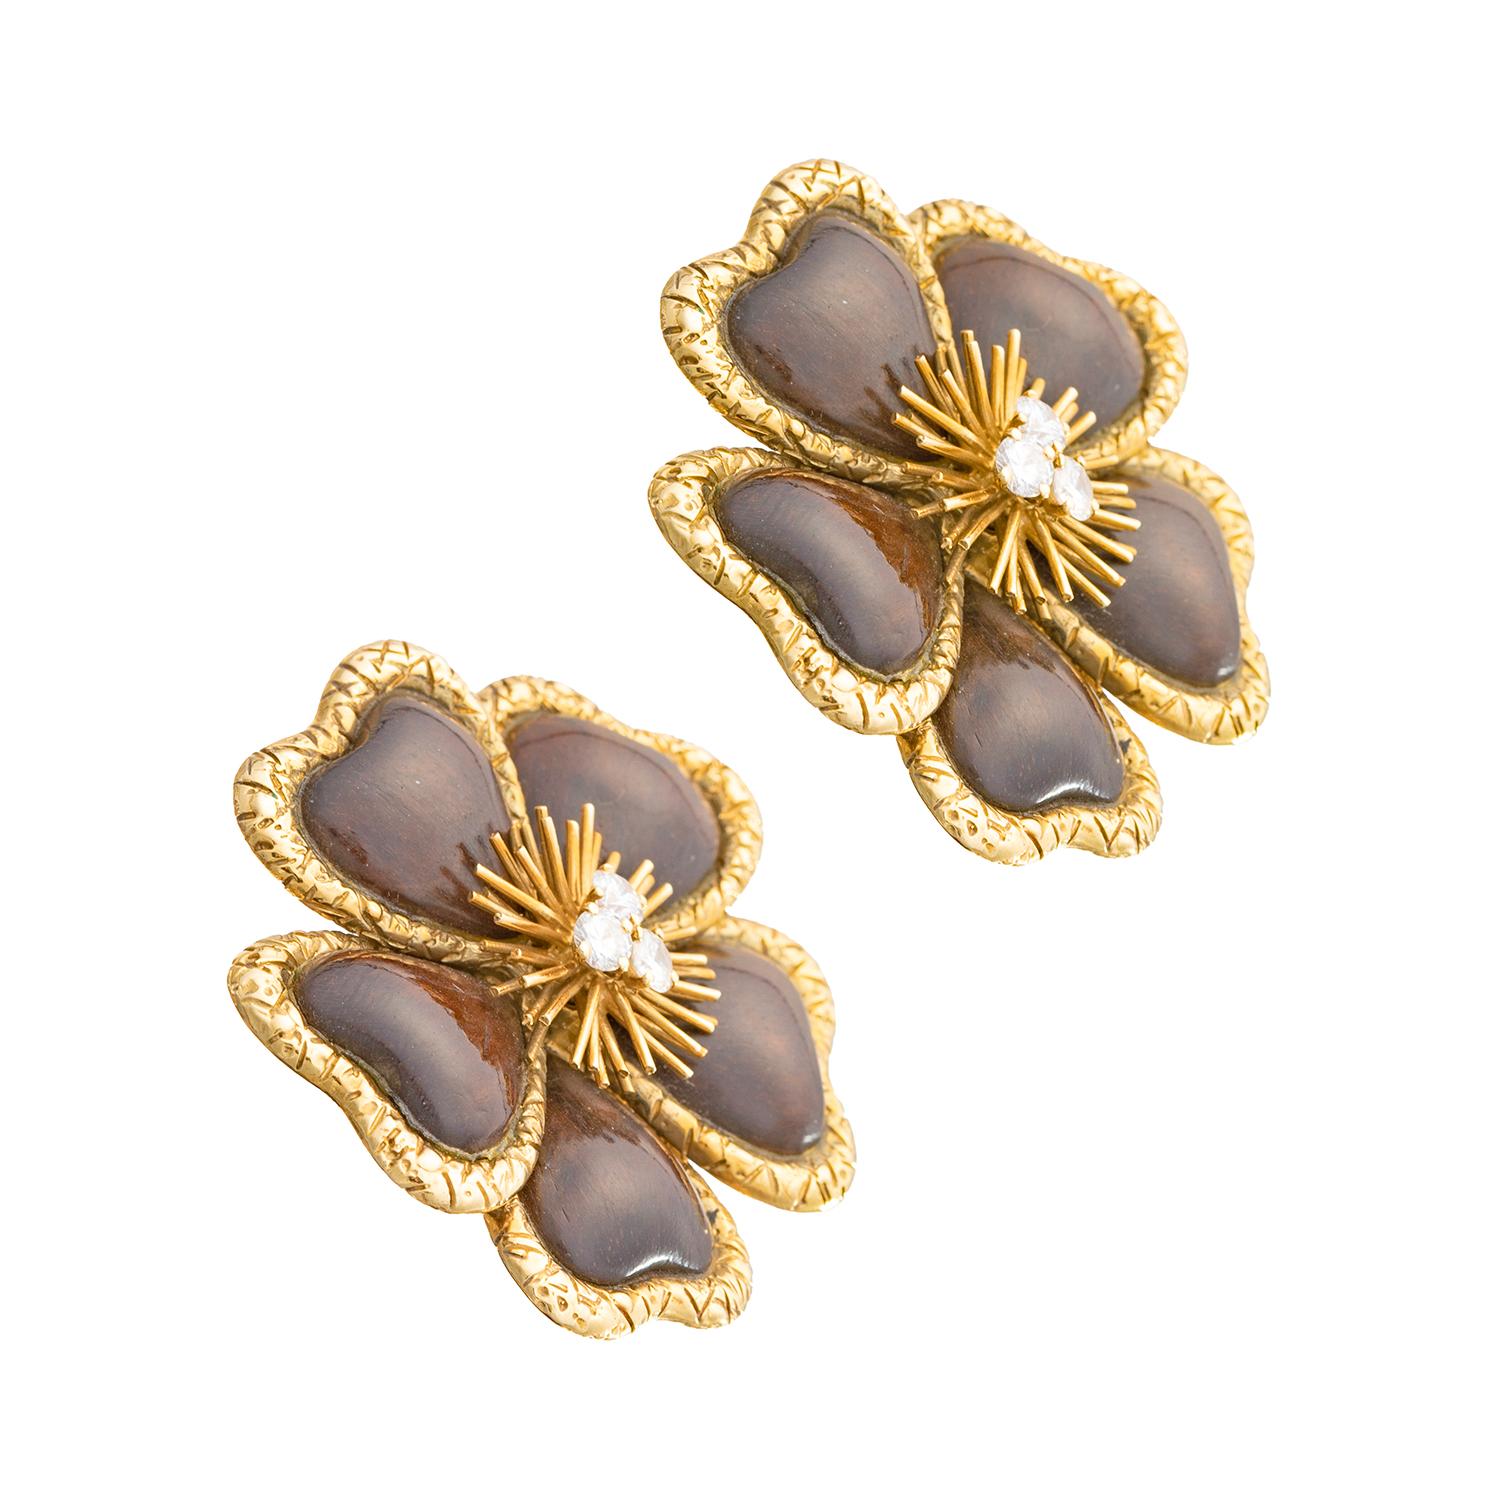 Van Cleef & Arpels large clematis flower clip earrings, each flowerhead centering three round brilliant-cut diamonds within a gold wire spray surrounded by five carved wood petals within hammered 18k yellow gold frames.  Signed 